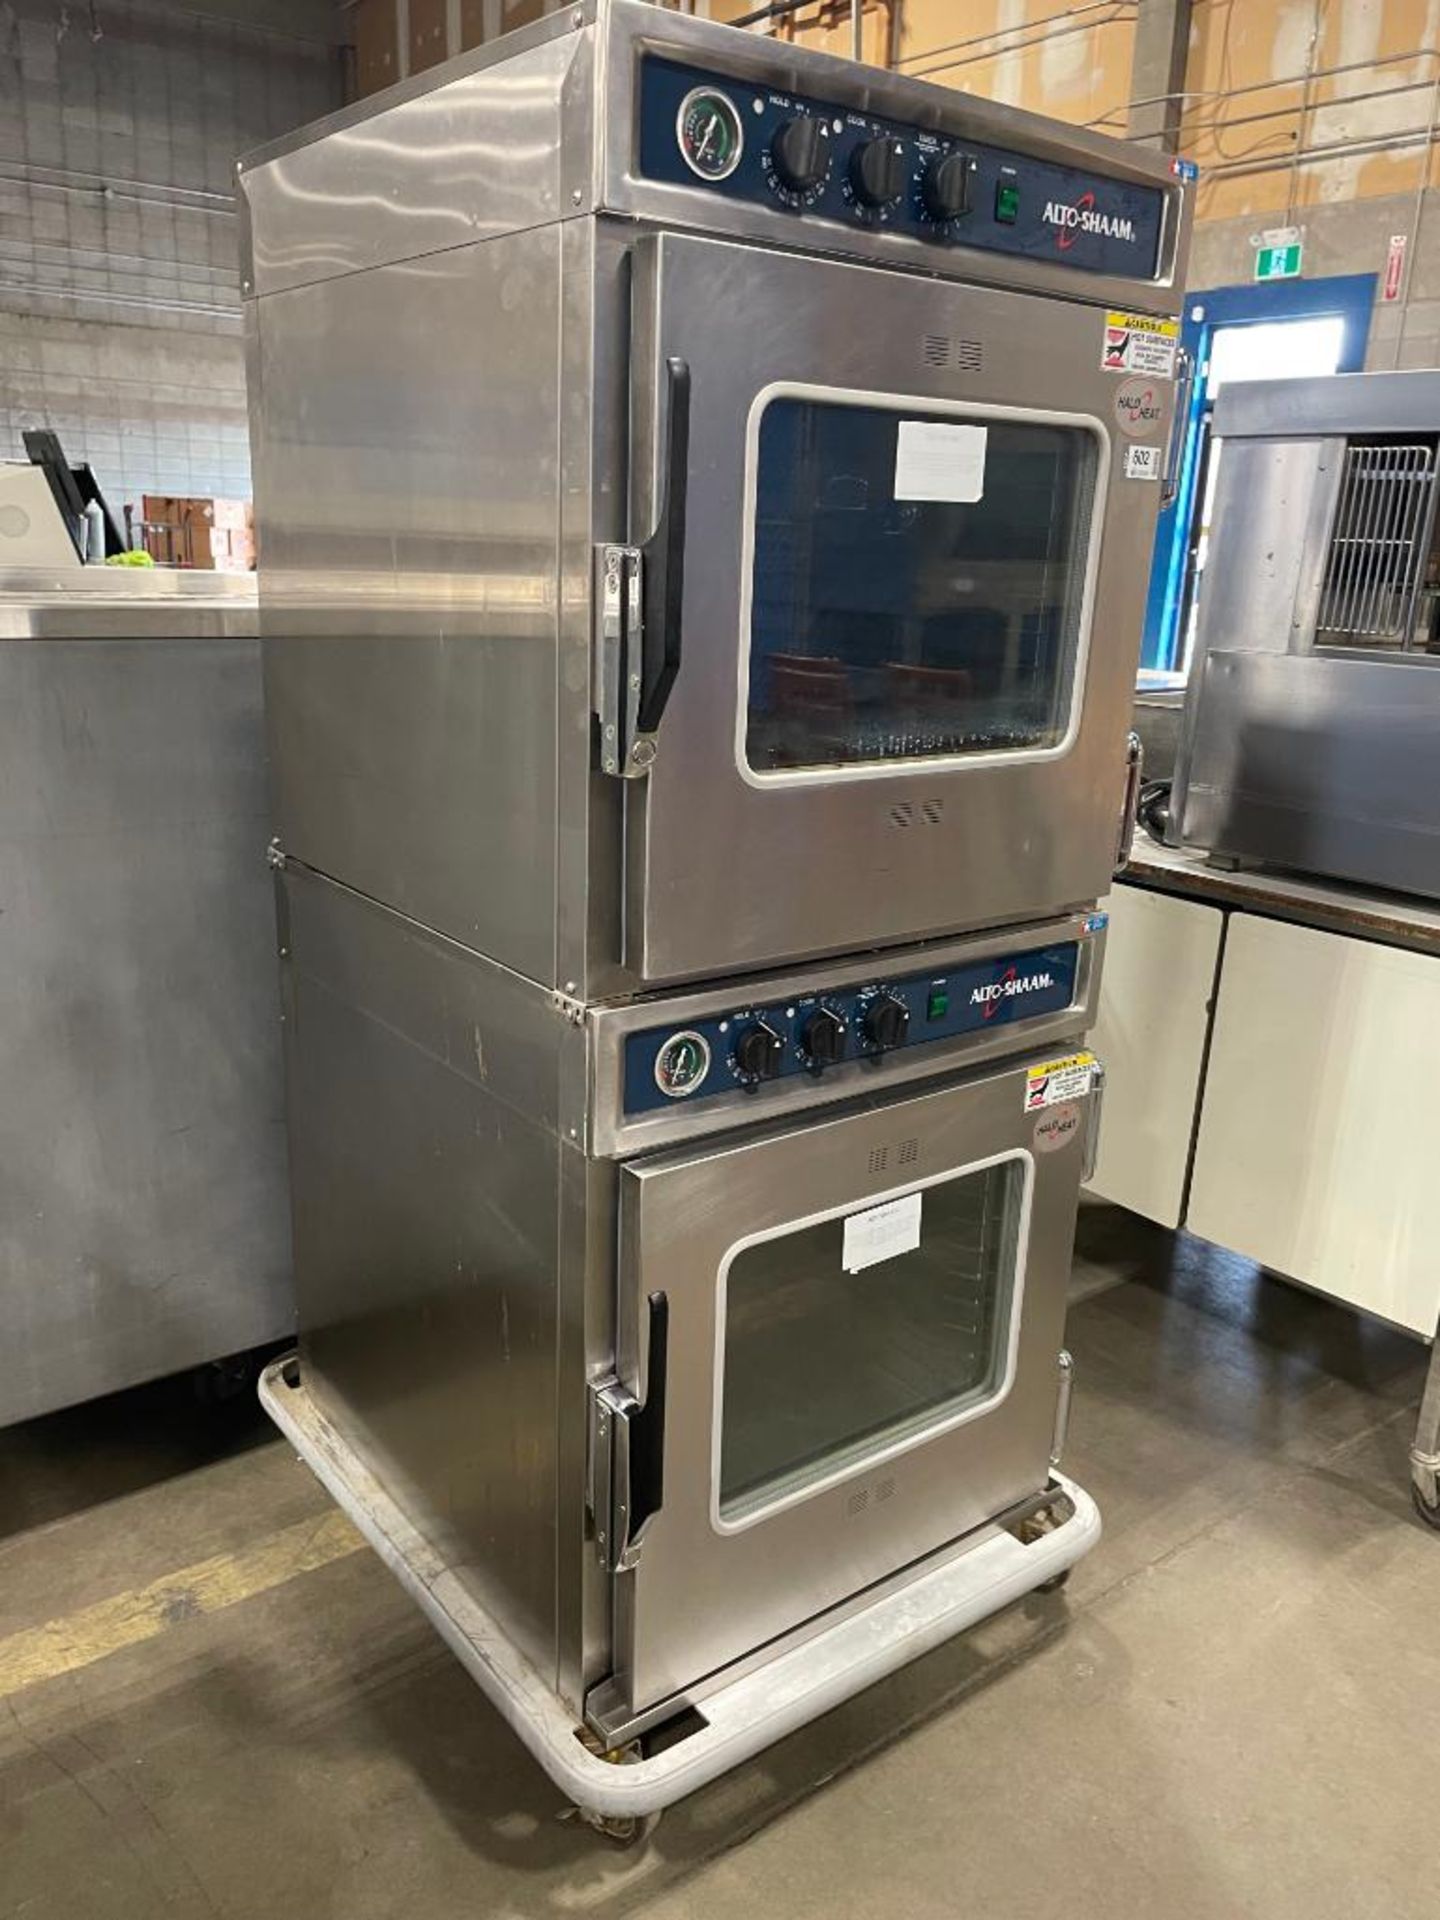 DOUBLE STACKED ALTO-SHAAM 750-TH-II COOK AND HOLD OVEN - Image 24 of 25